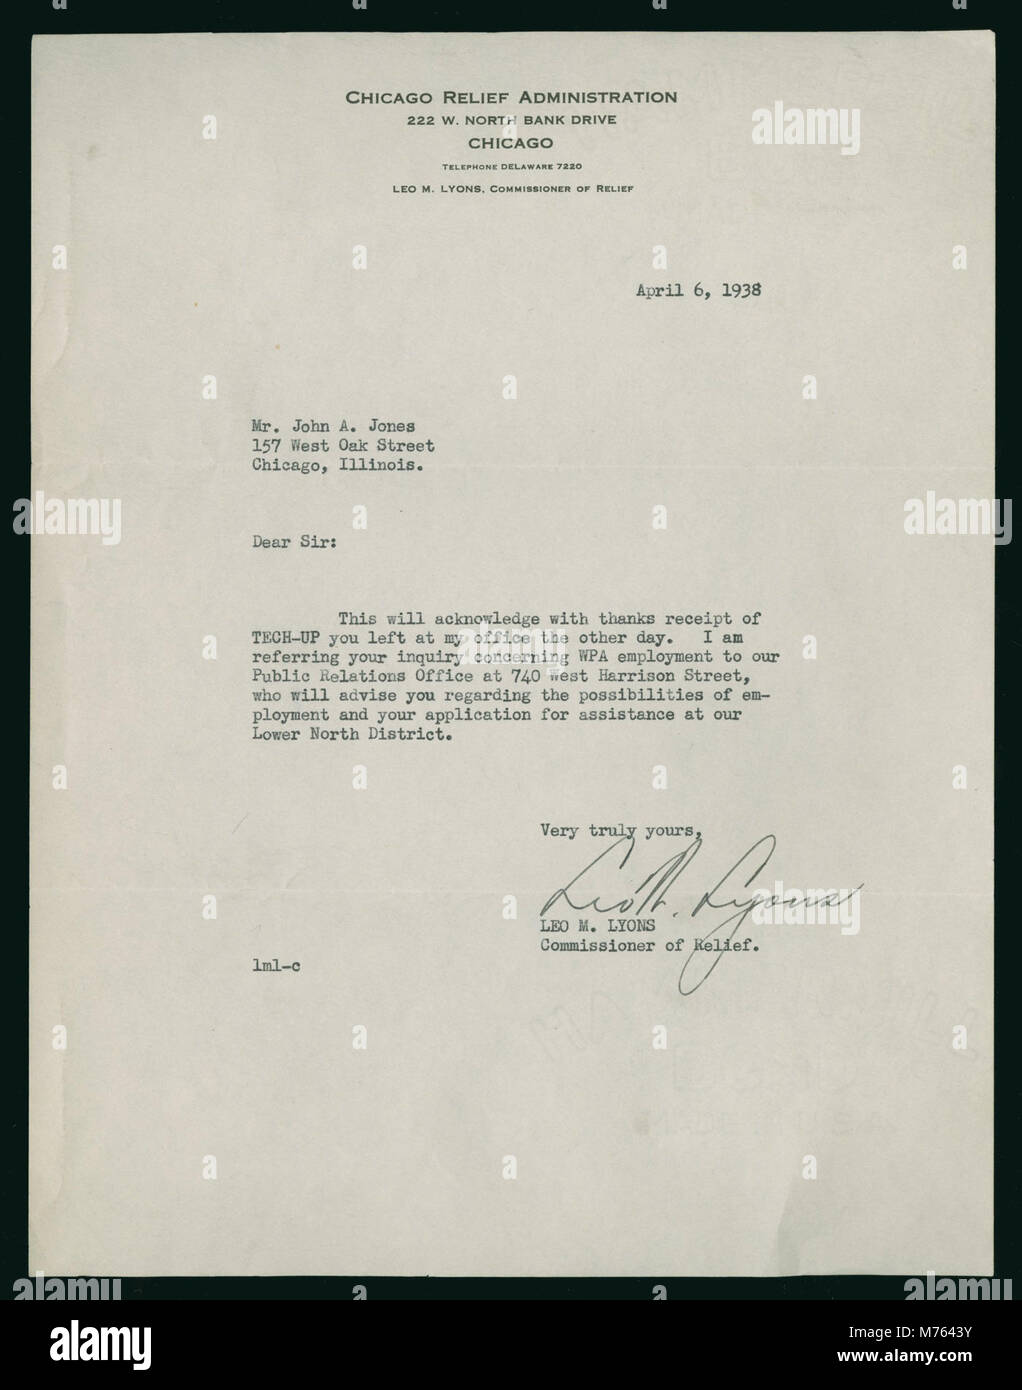 Letter to Jack Jones from Leo M. Lyons, August 6, 1938 (NBY 1019 Stock  Photo - Alamy